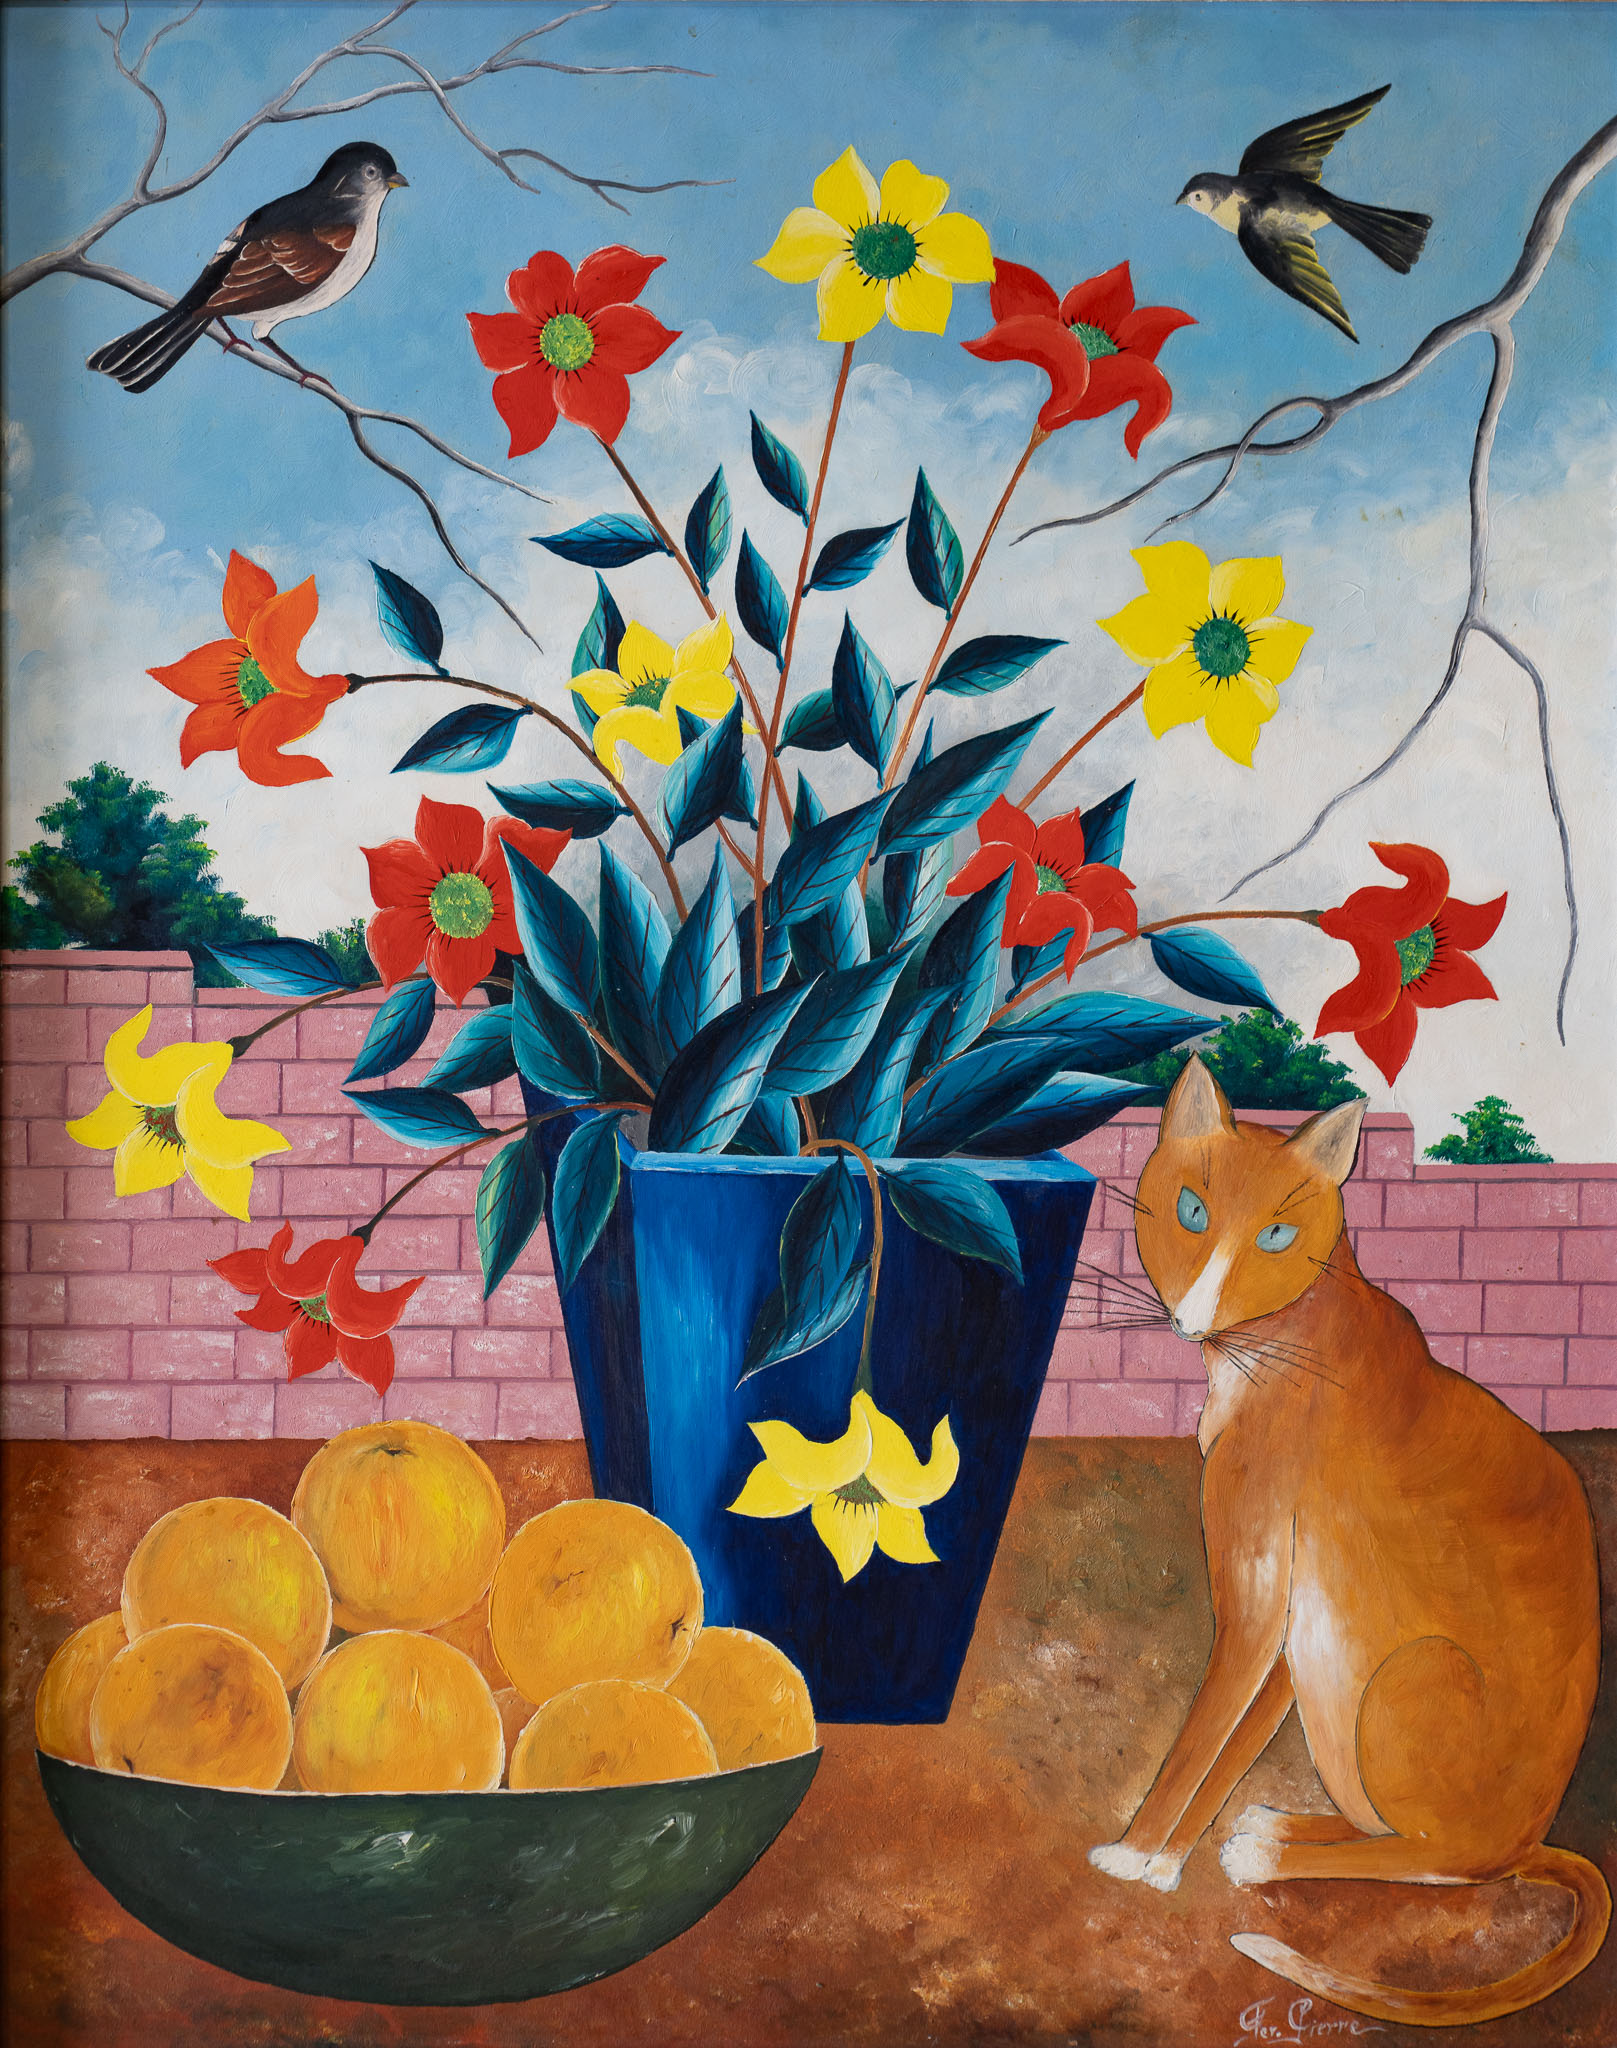 Cat with fruit, flowers and birds, 1960s